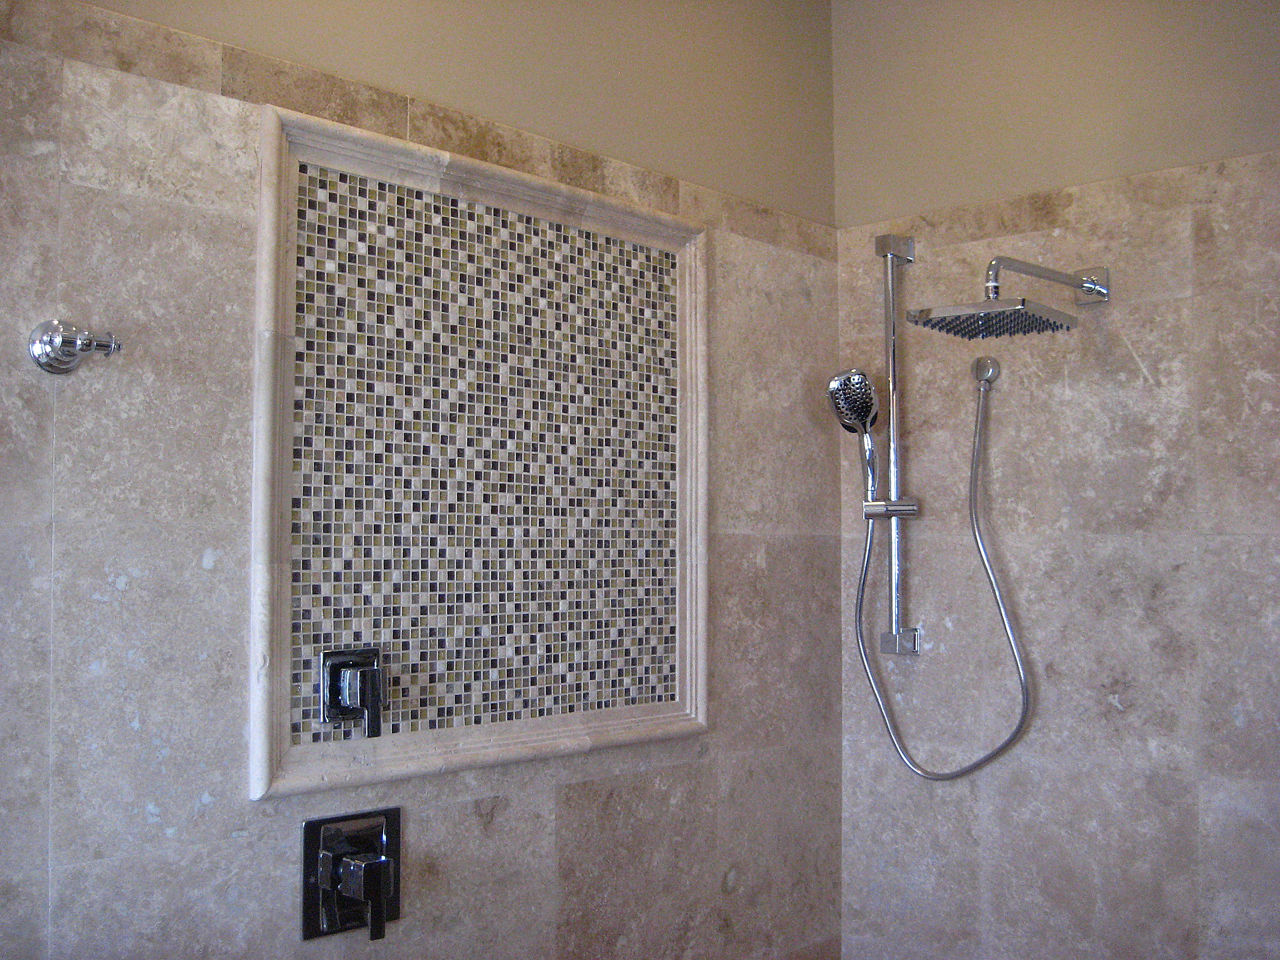 Travertine shower with best shower faceucet